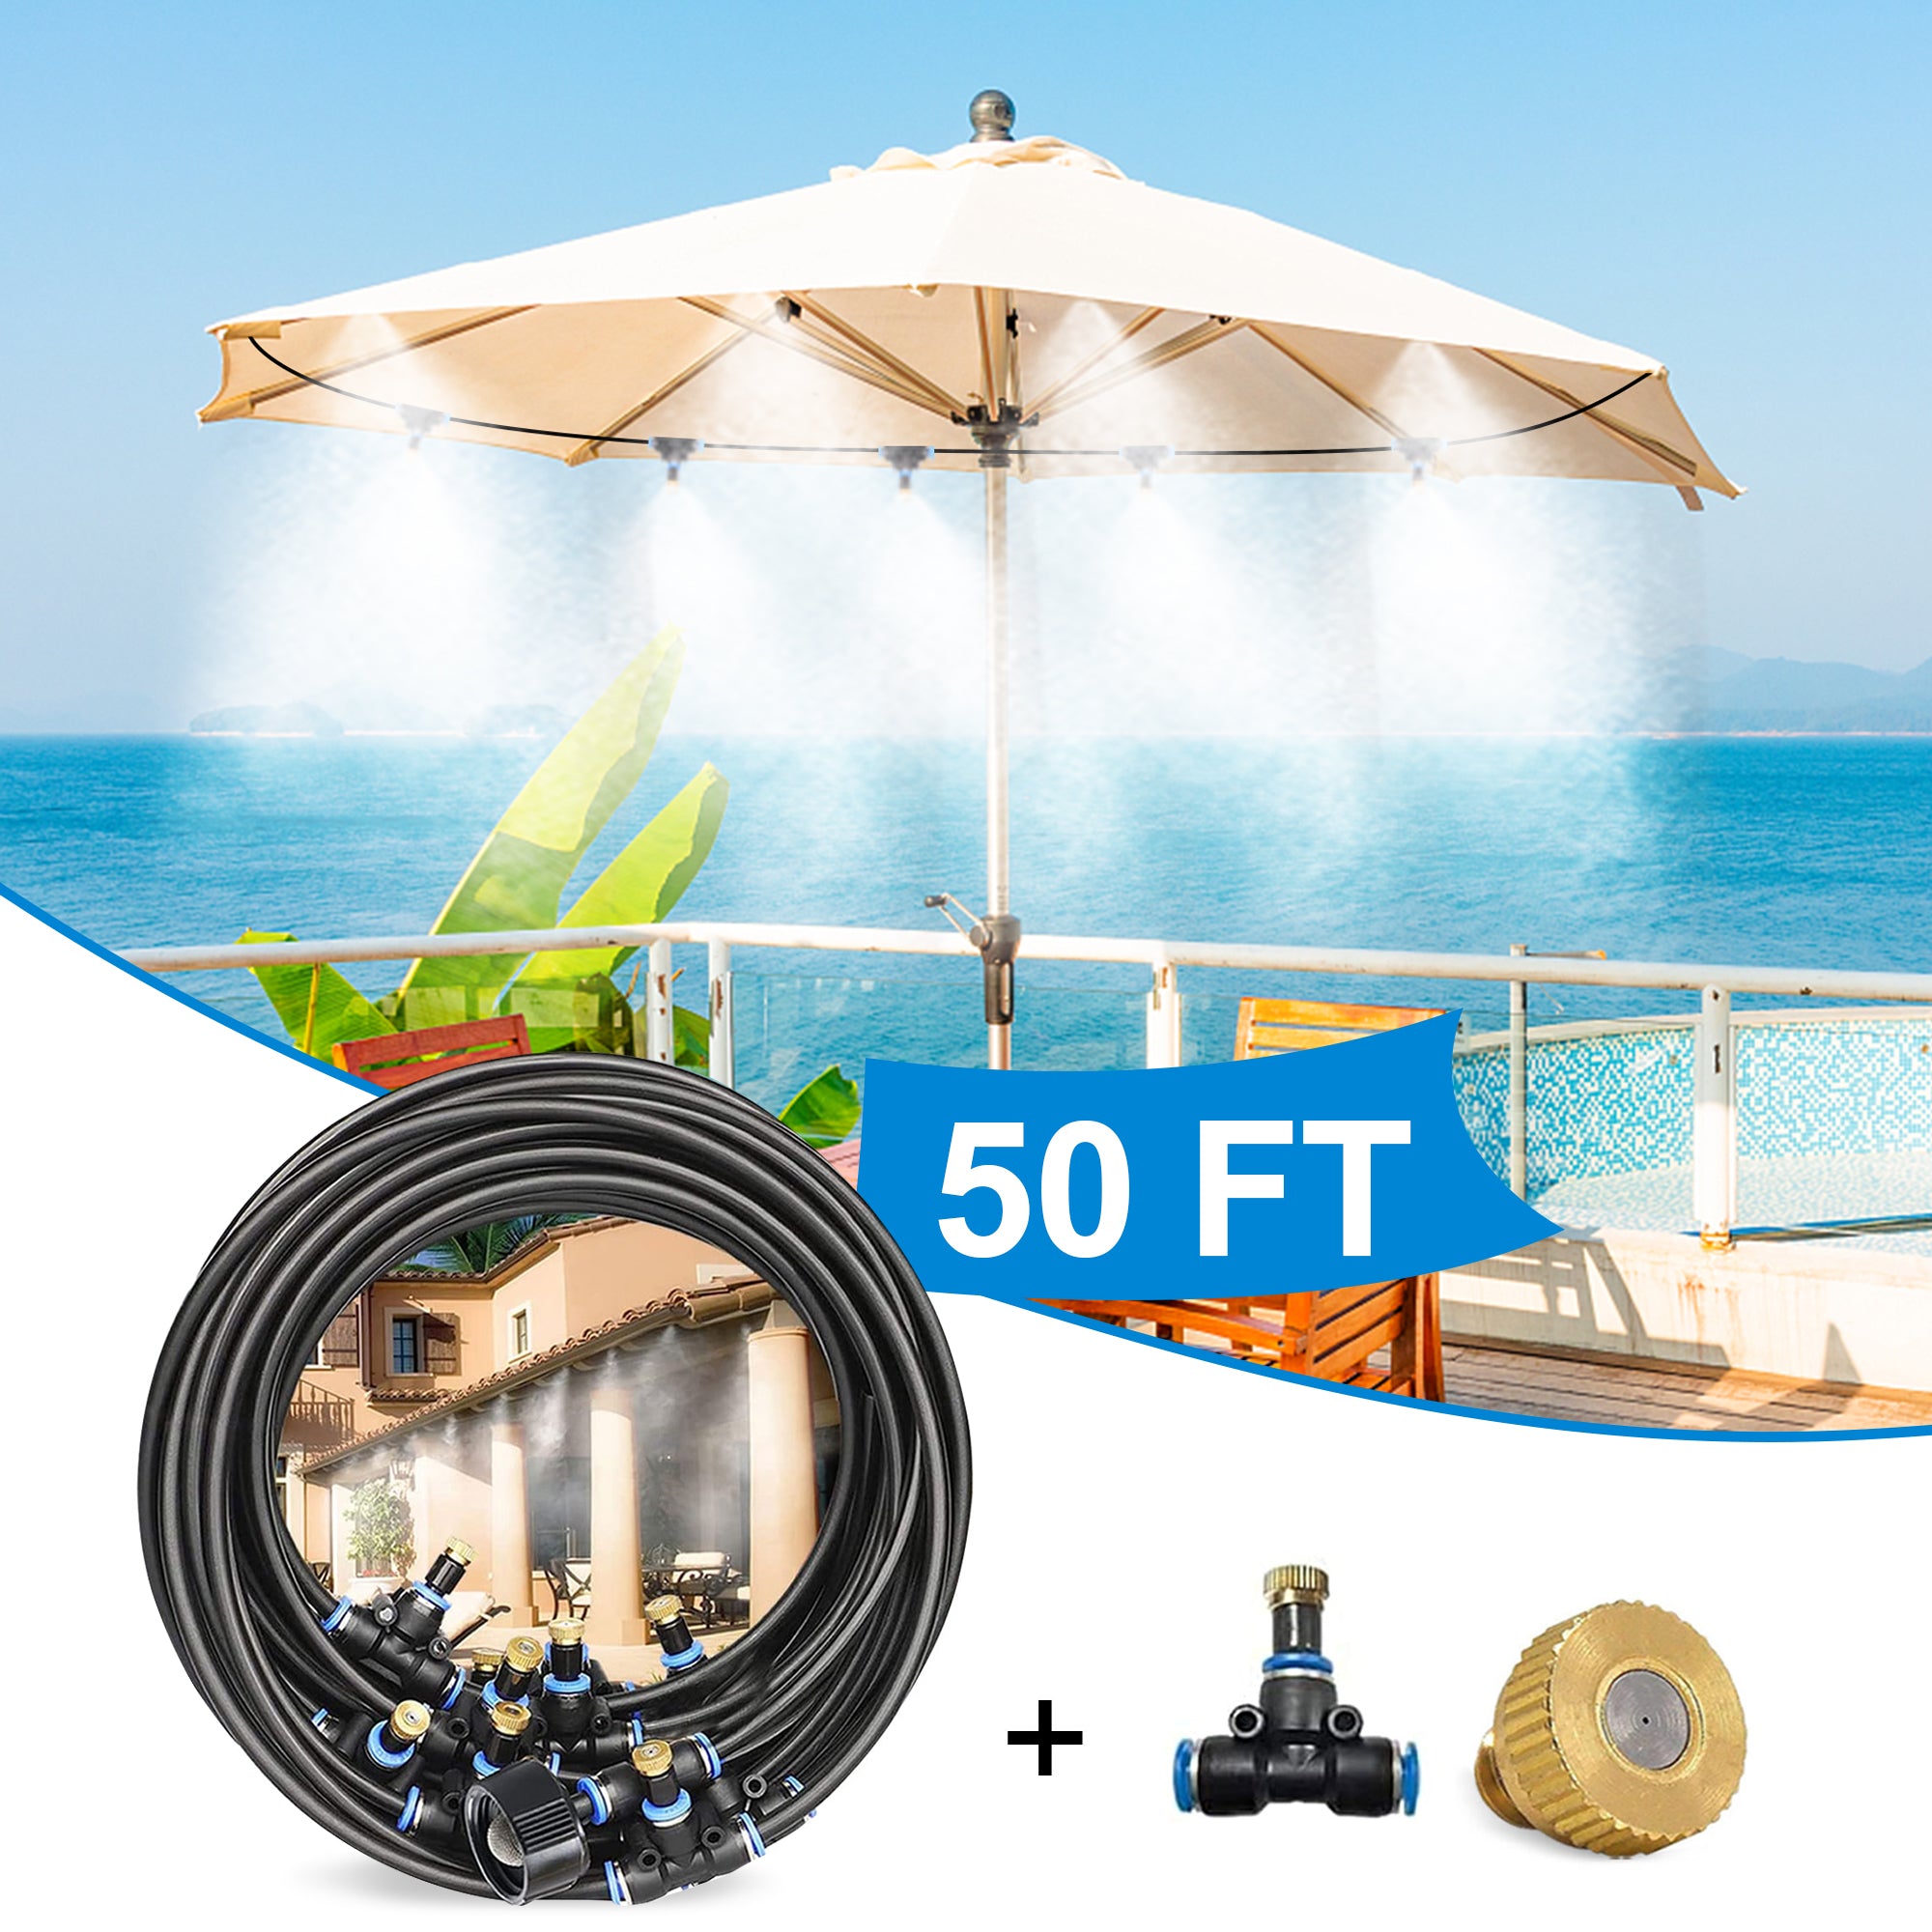 Outdoor Water Misting Cooling System,50FT|15M +10 Pcs Mister Nozzles+Tees for 1/4'' Hose